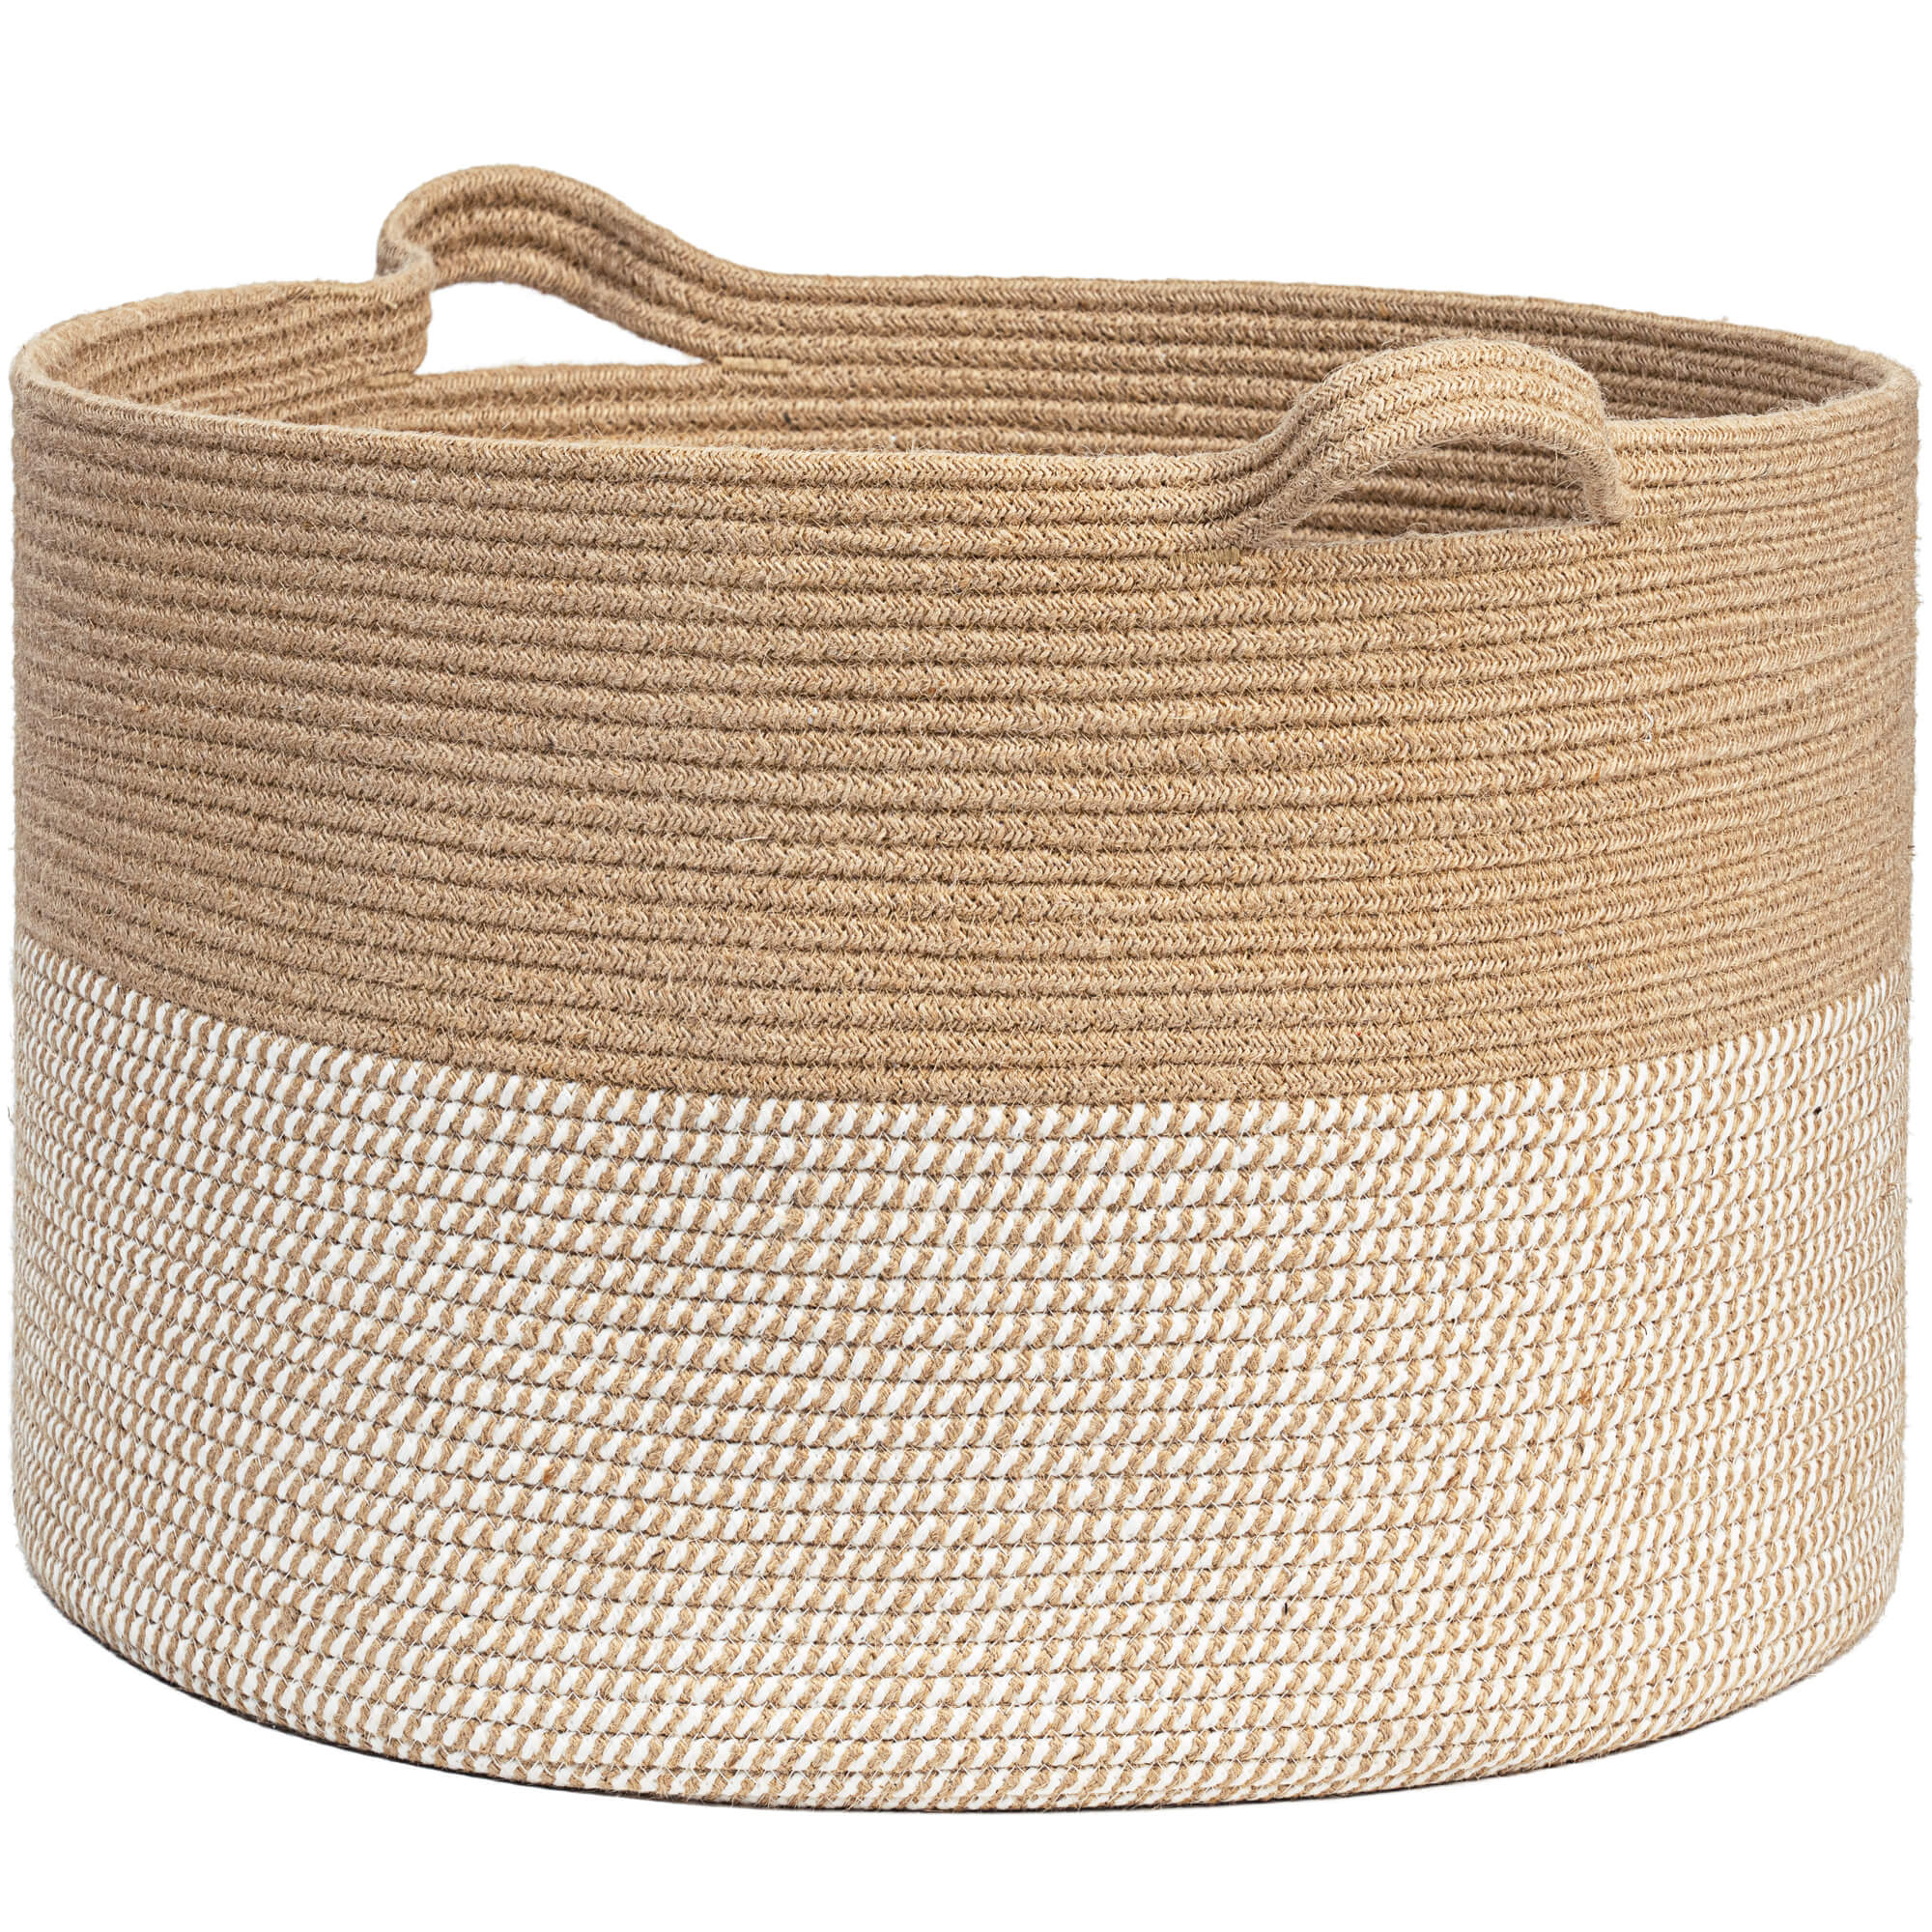 Goodpick Extra Large Woven Baskets with Handle